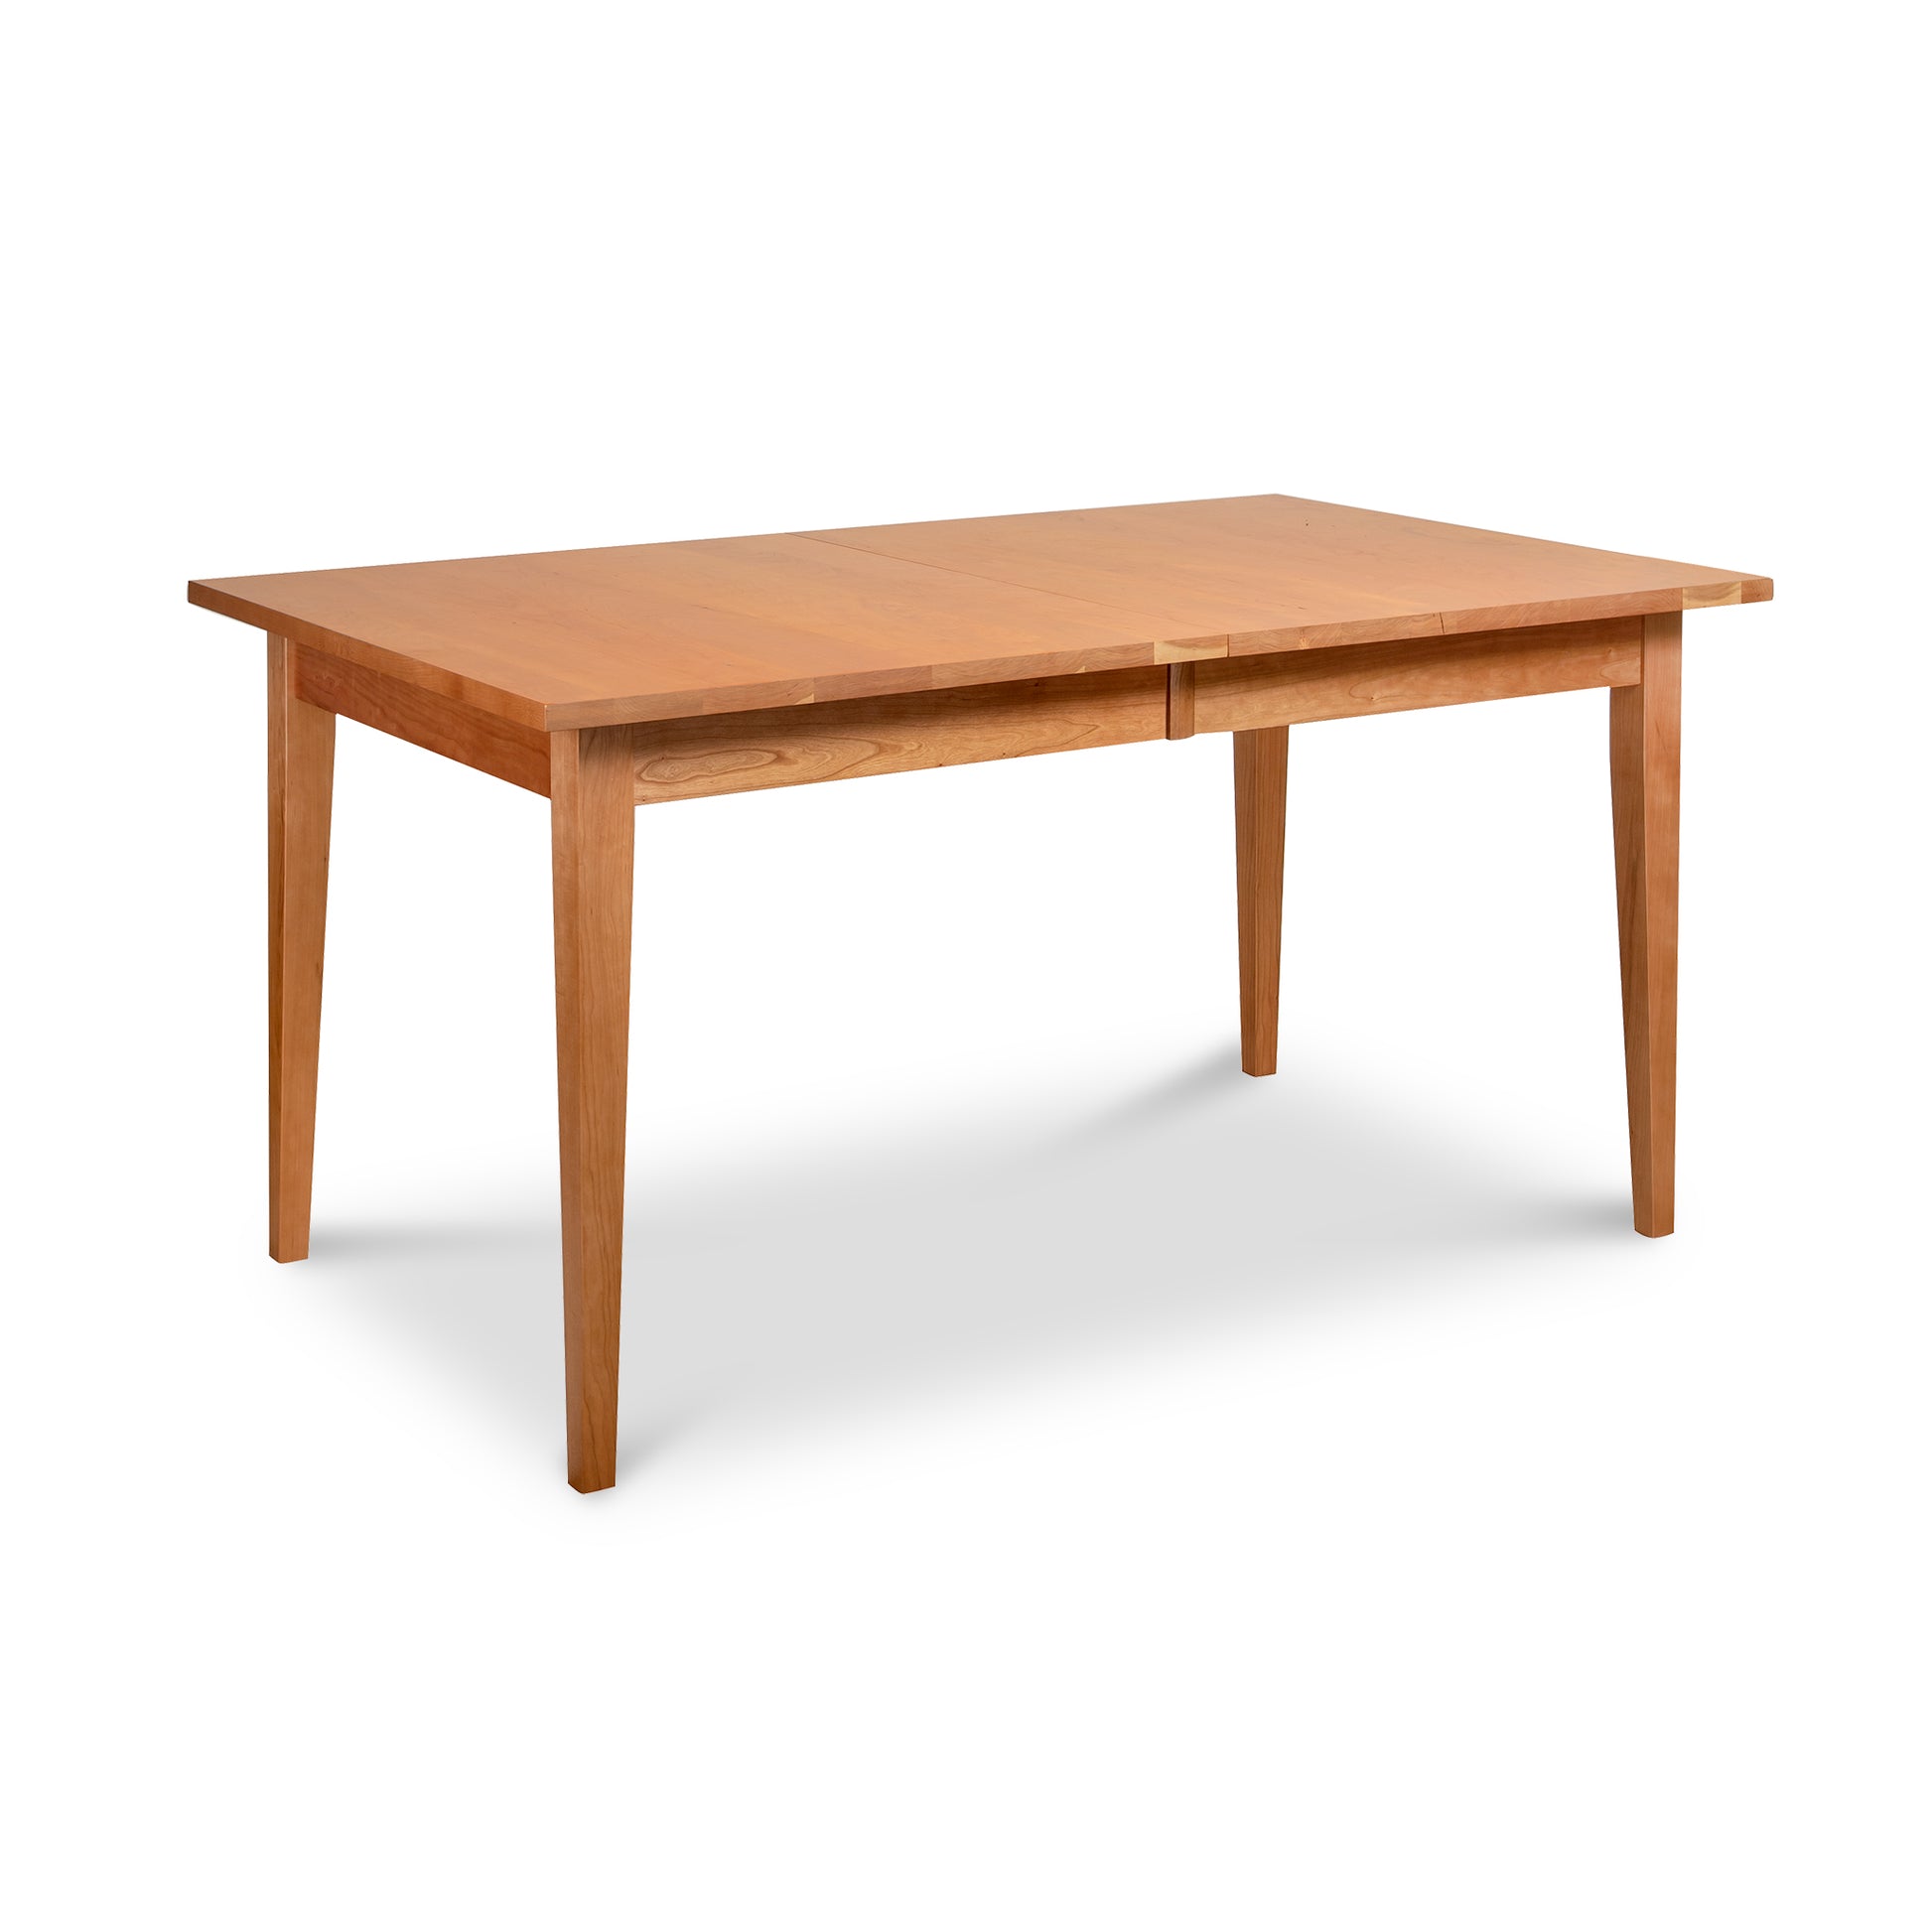 The Classic Shaker Extension Dining Table - Floor Model by Lyndon Furniture is a mid-century modern 20th century furniture design, featuring a wooden construction and two legs. It is showcased on a crisp white background, making it an